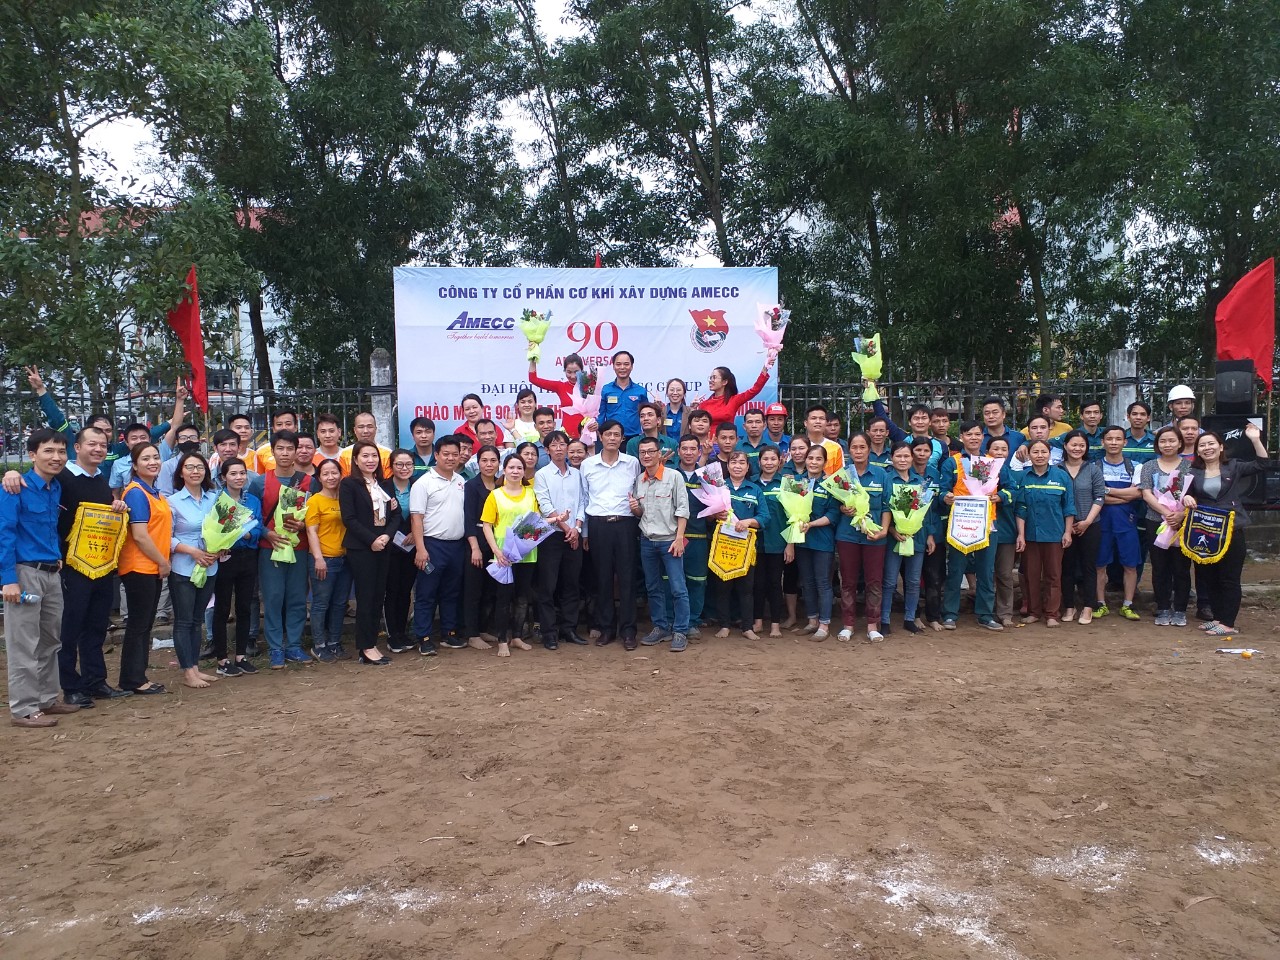 AMECC - OPENING SPORTS TO CELEBRATE 90 YEARS OF HO CHI MINH Youth Union